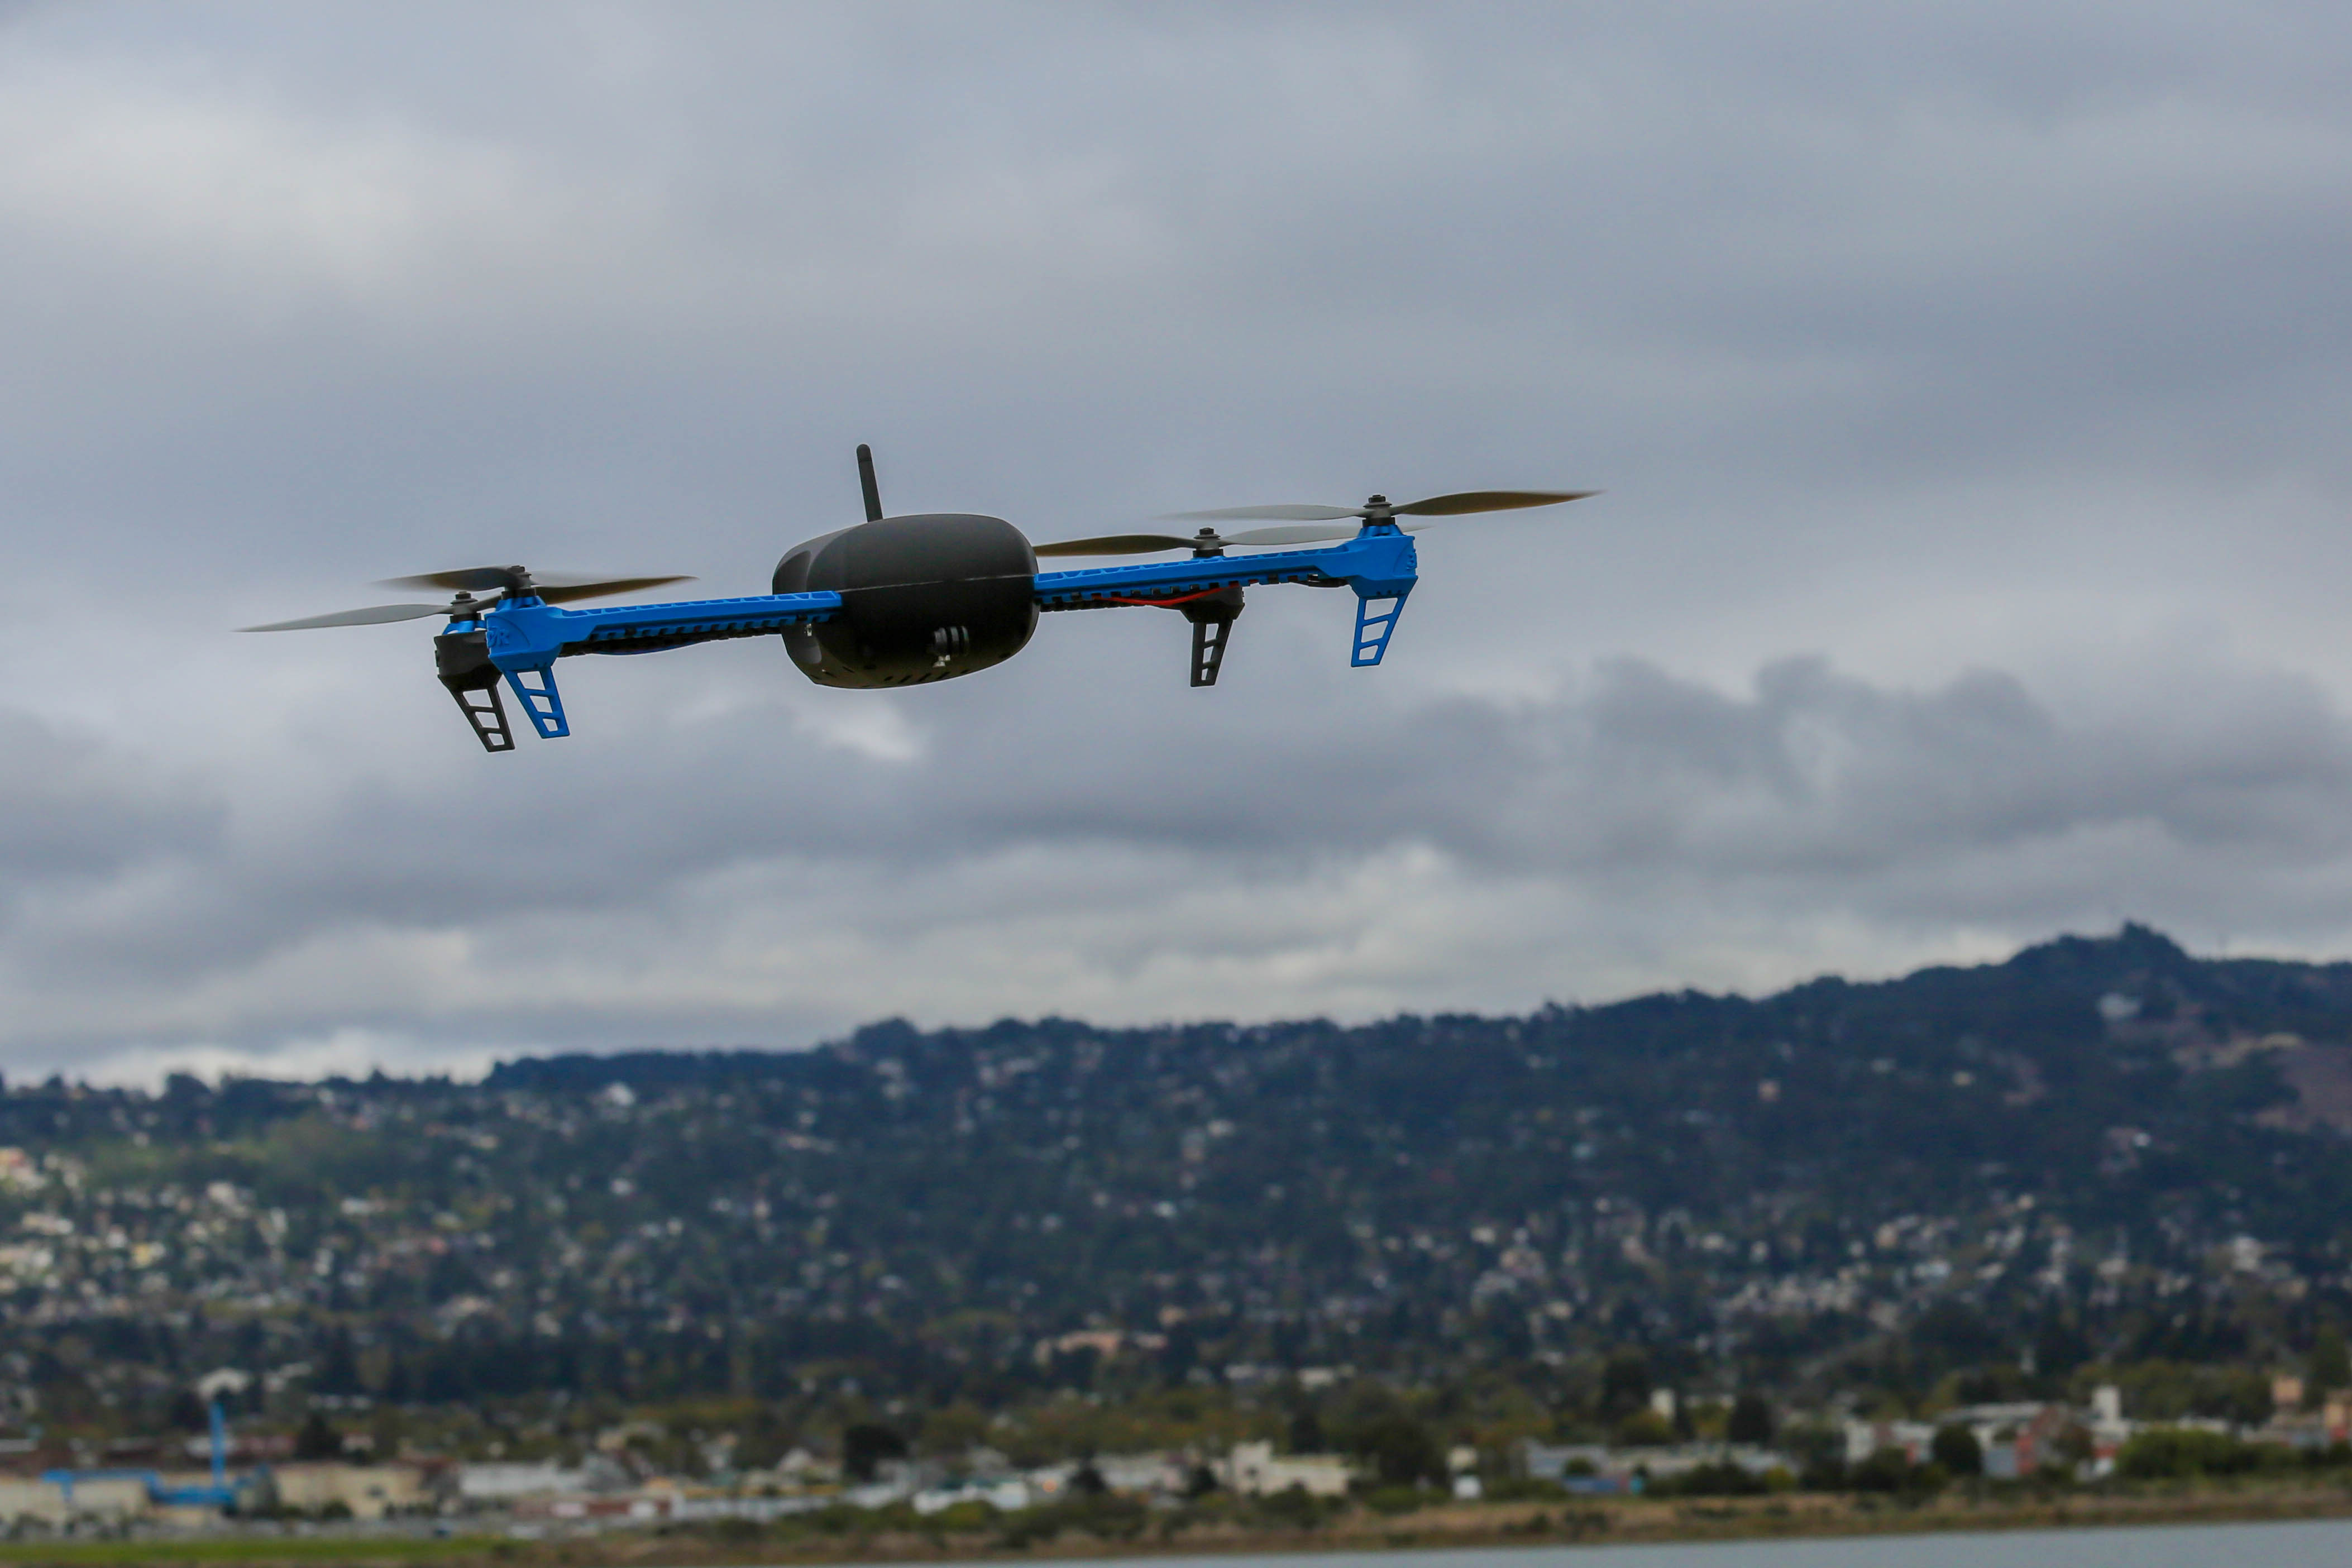 Gigaom | So you want to fly drones? Here's what the law says